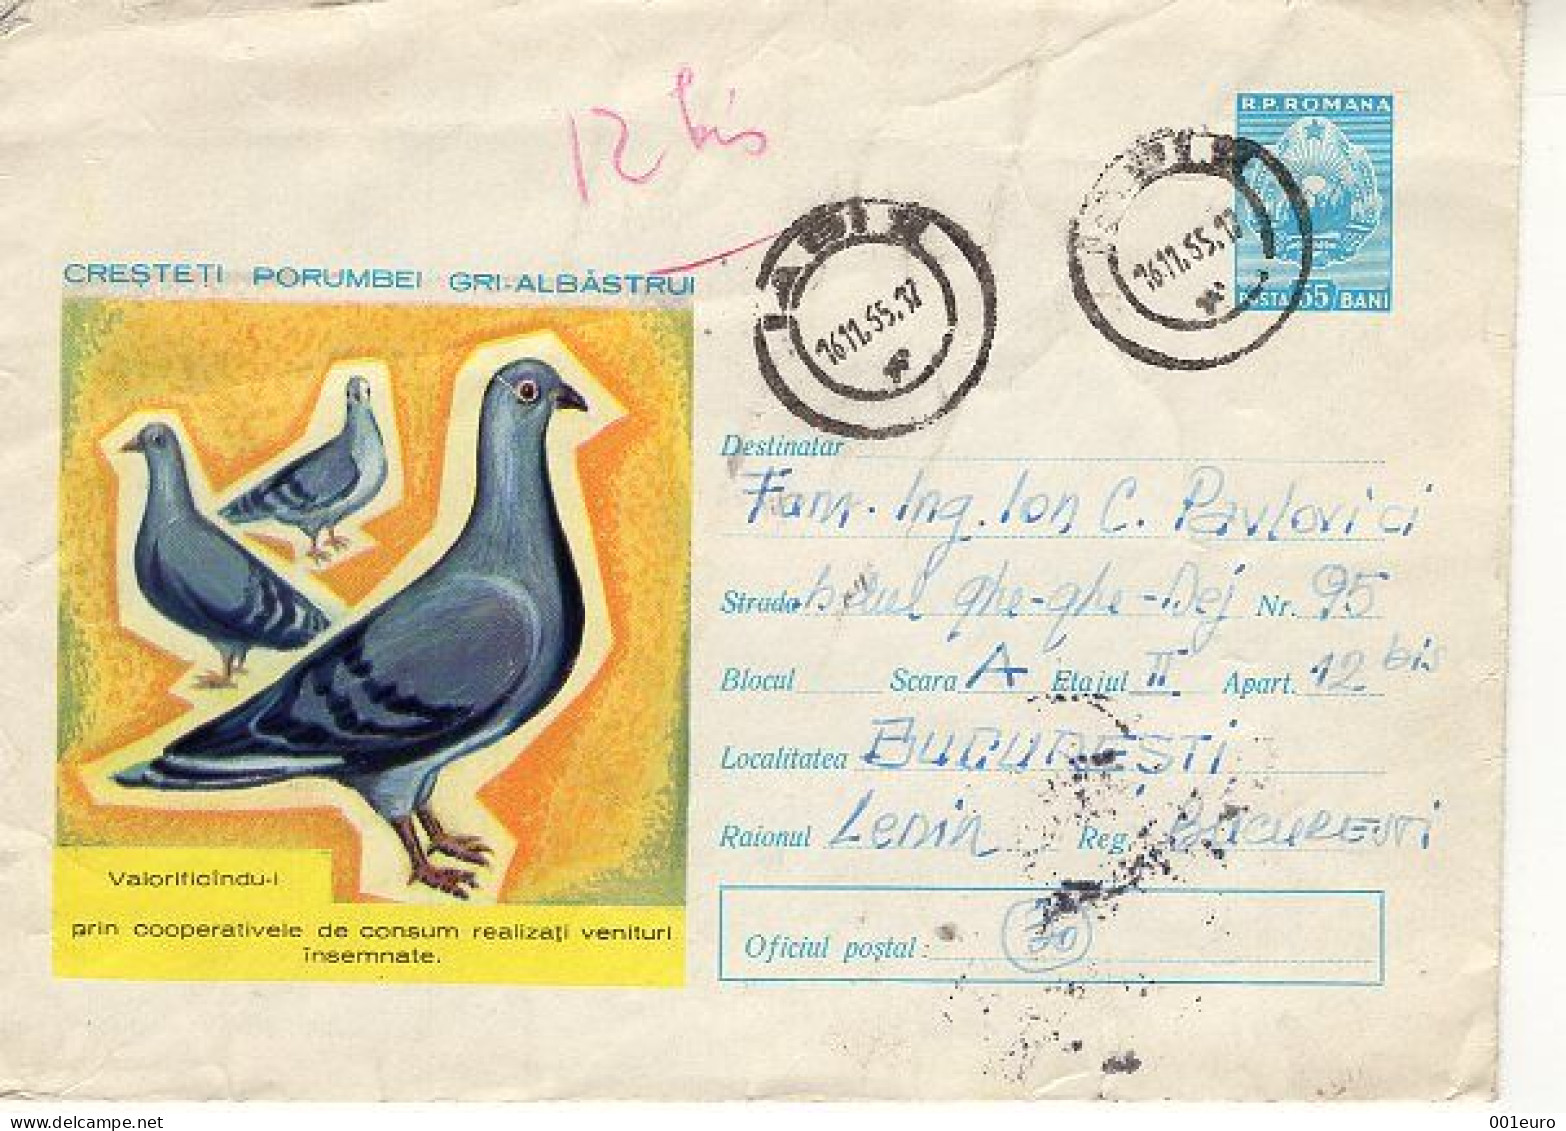 ROMANIA 393y1963: Birds - PIGEONS, Used Prepaid Postal Stationery Cover - Registered Shipping! - Entiers Postaux